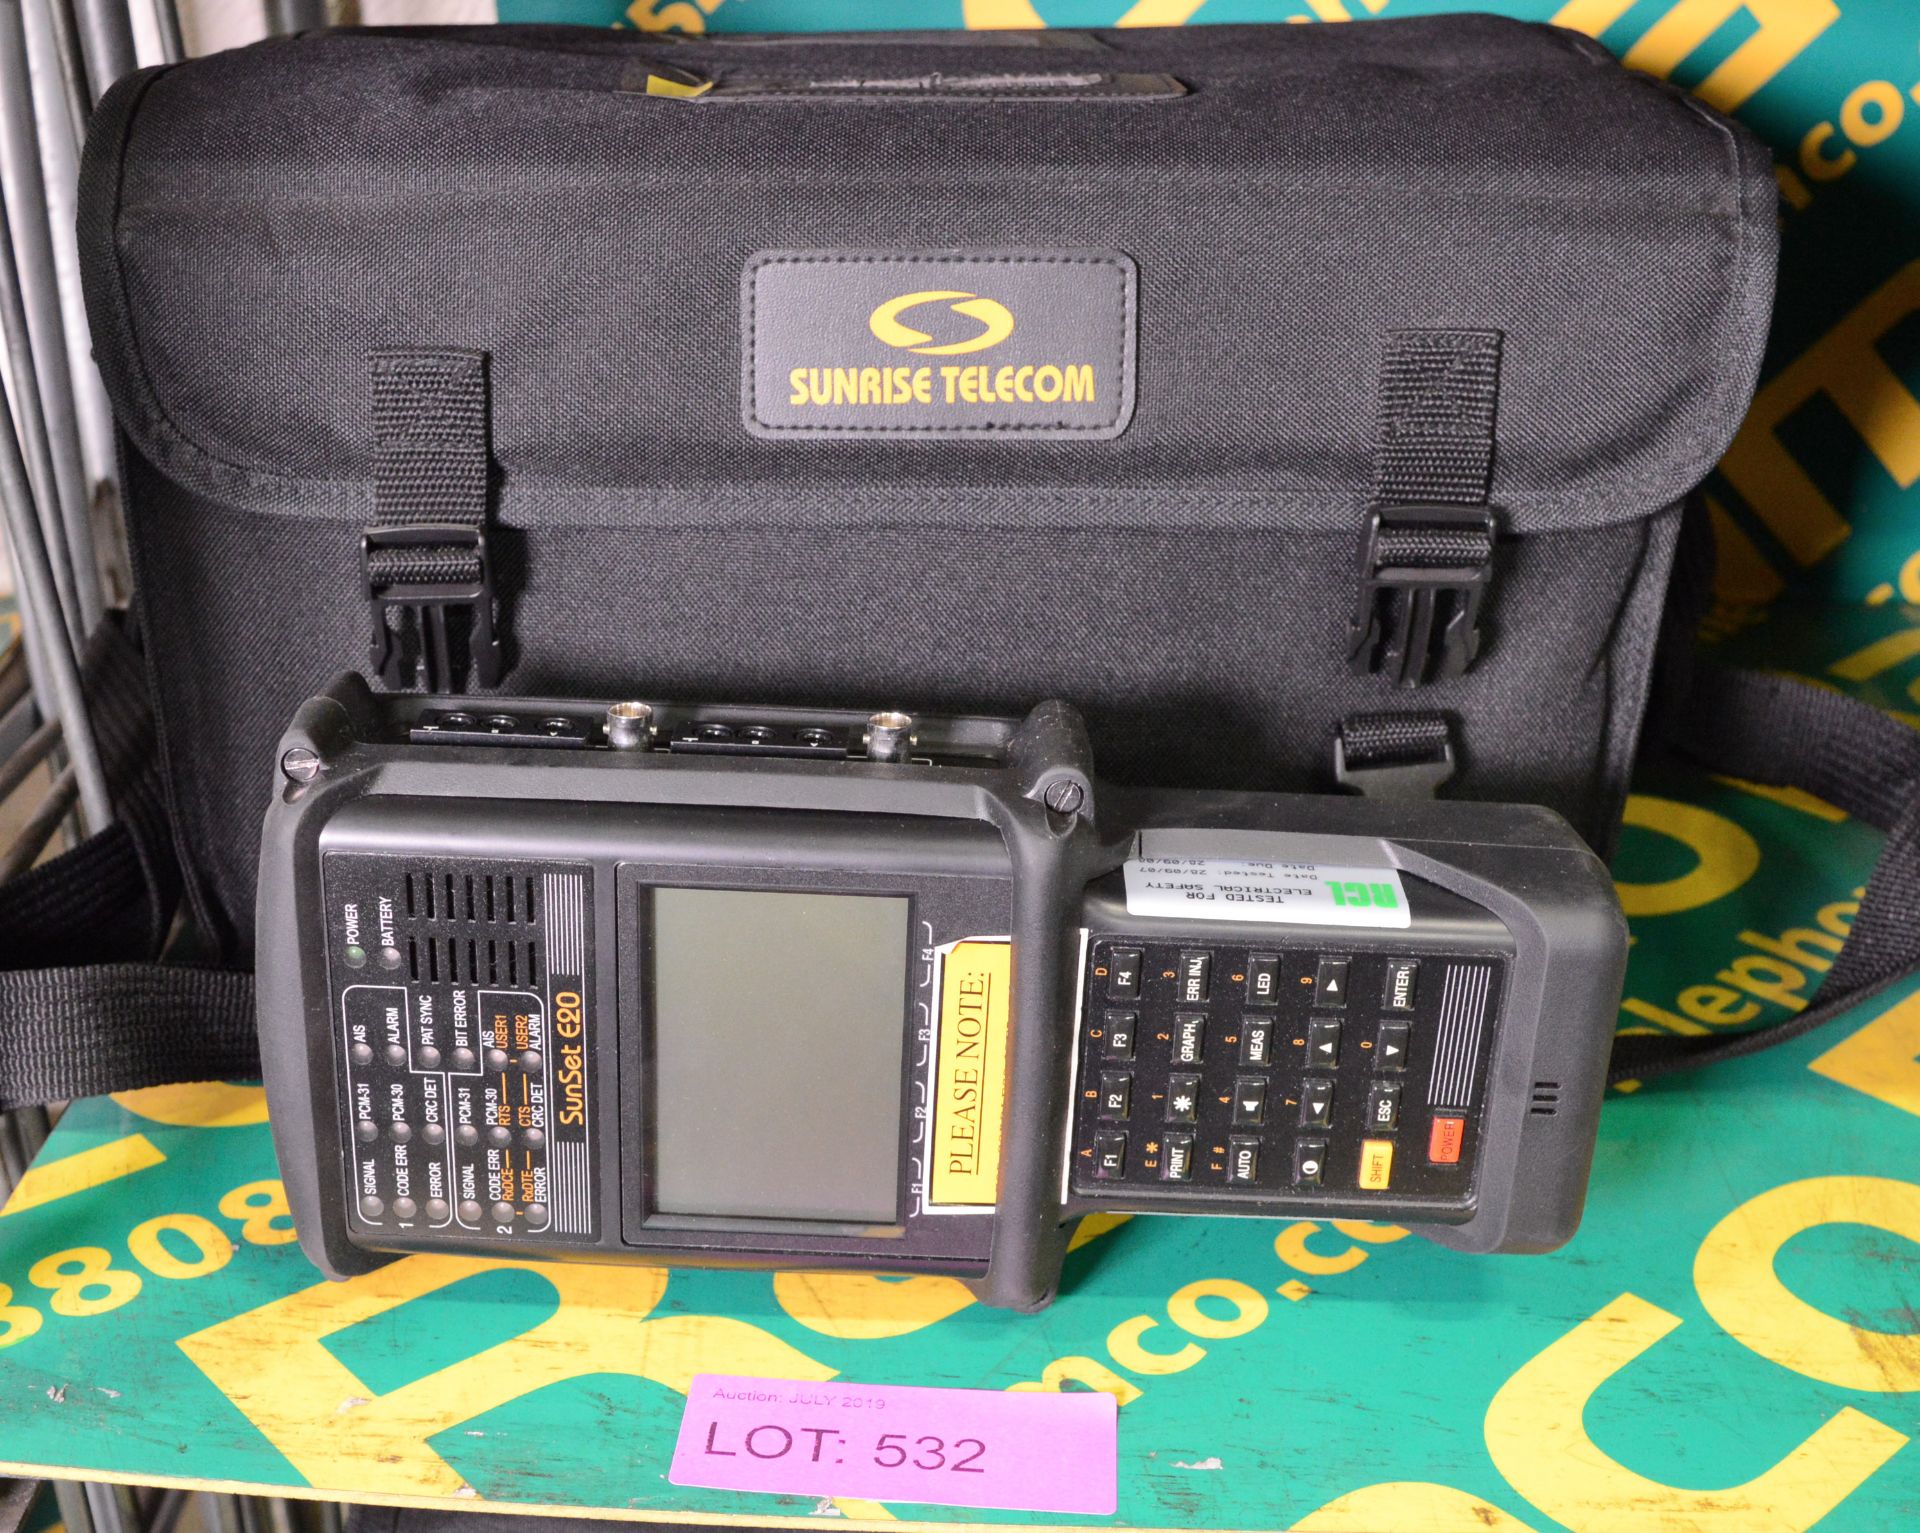 Sunset E20 Digital Data Analyser 2Mbps & Accessories in Carry Case. - Image 2 of 2